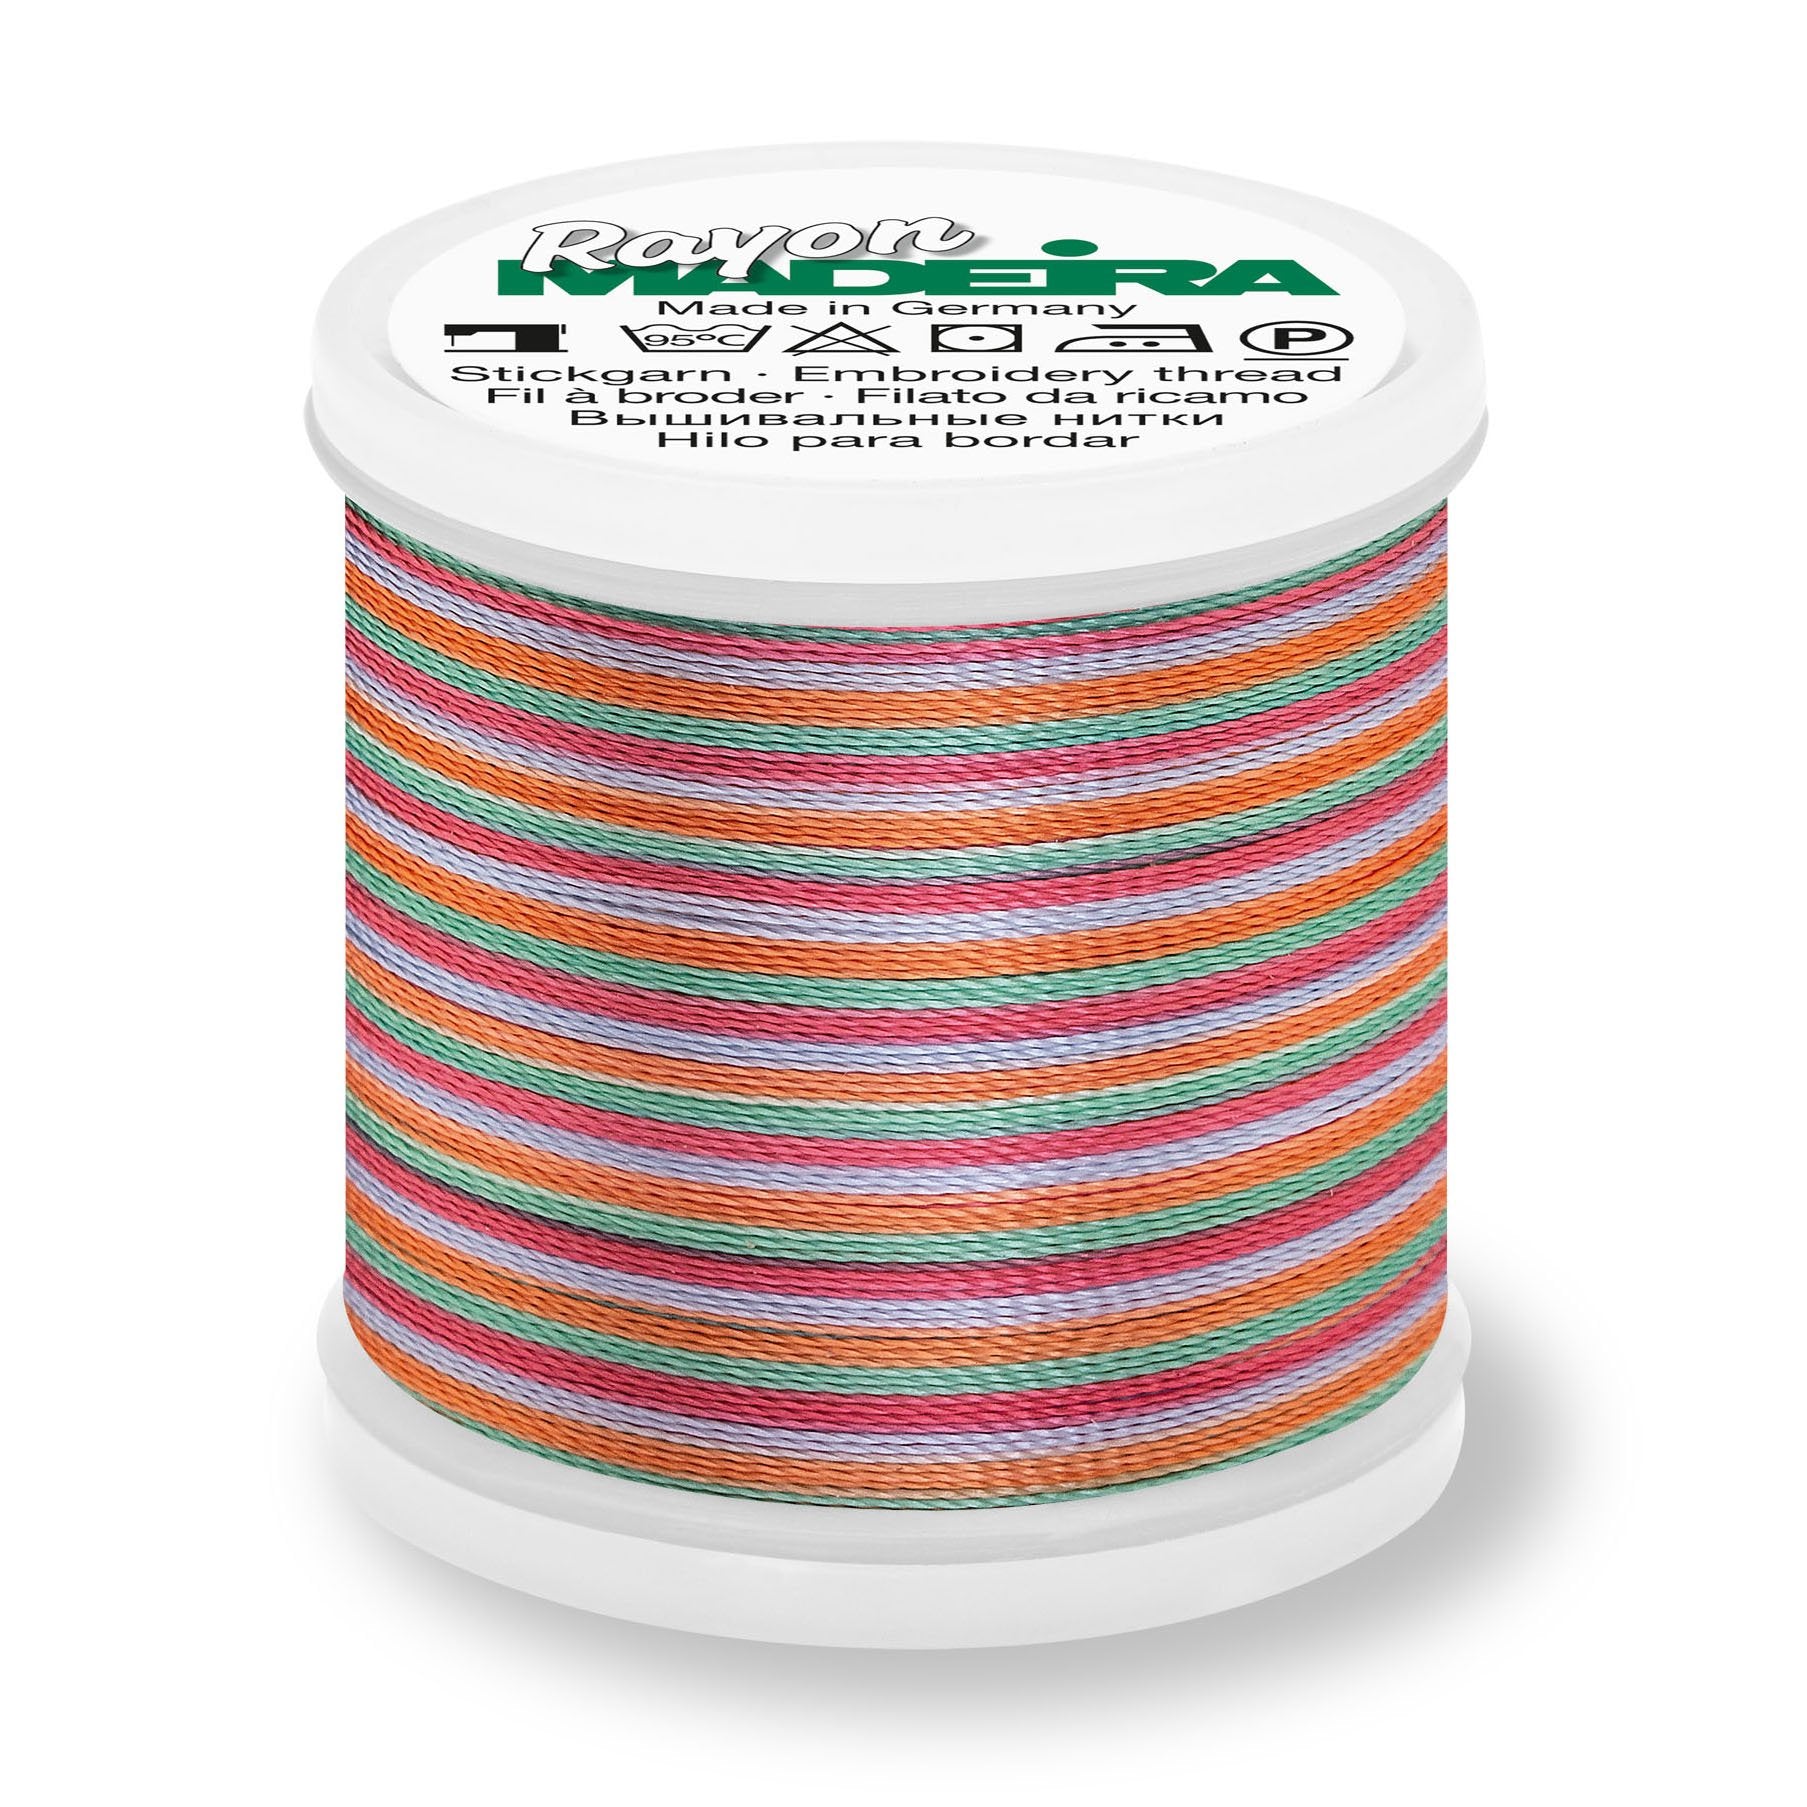 Madeira Rayon 40 Embroidery Thread 200m Multi #2141 Red/Orange/Green/Blue from Jaycotts Sewing Supplies